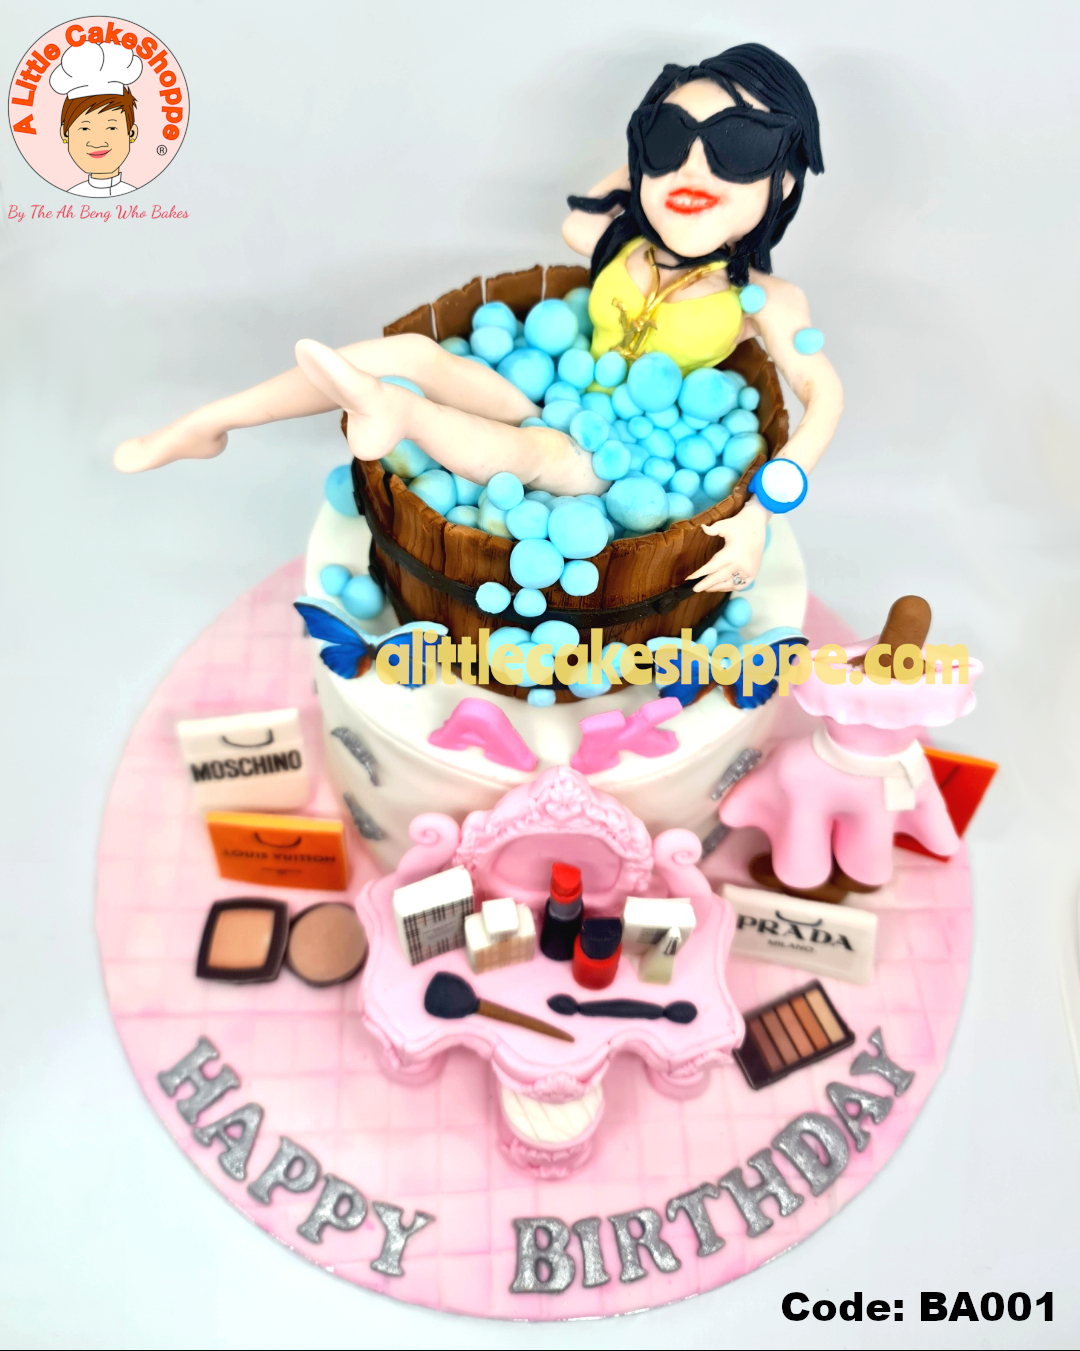 Best Cake Shop Singapore Delivery Best Customised Cake Shop Singapore customise cake custom cake 2D 3D birthday cake cupcakes desserts wedding corporate events anniversary 1st birthday 21st birthday fondant fresh cream buttercream cakes alittlecakeshoppe a little cake shoppe compliments review singapore bakers SG cake shop cakeshop ah beng who bakes sgbakes novelty cakes sgcakes licensed sfa nea cake delivery celebration cakes kids birthday cake surprise cake adult children luxury bags makeup taitai